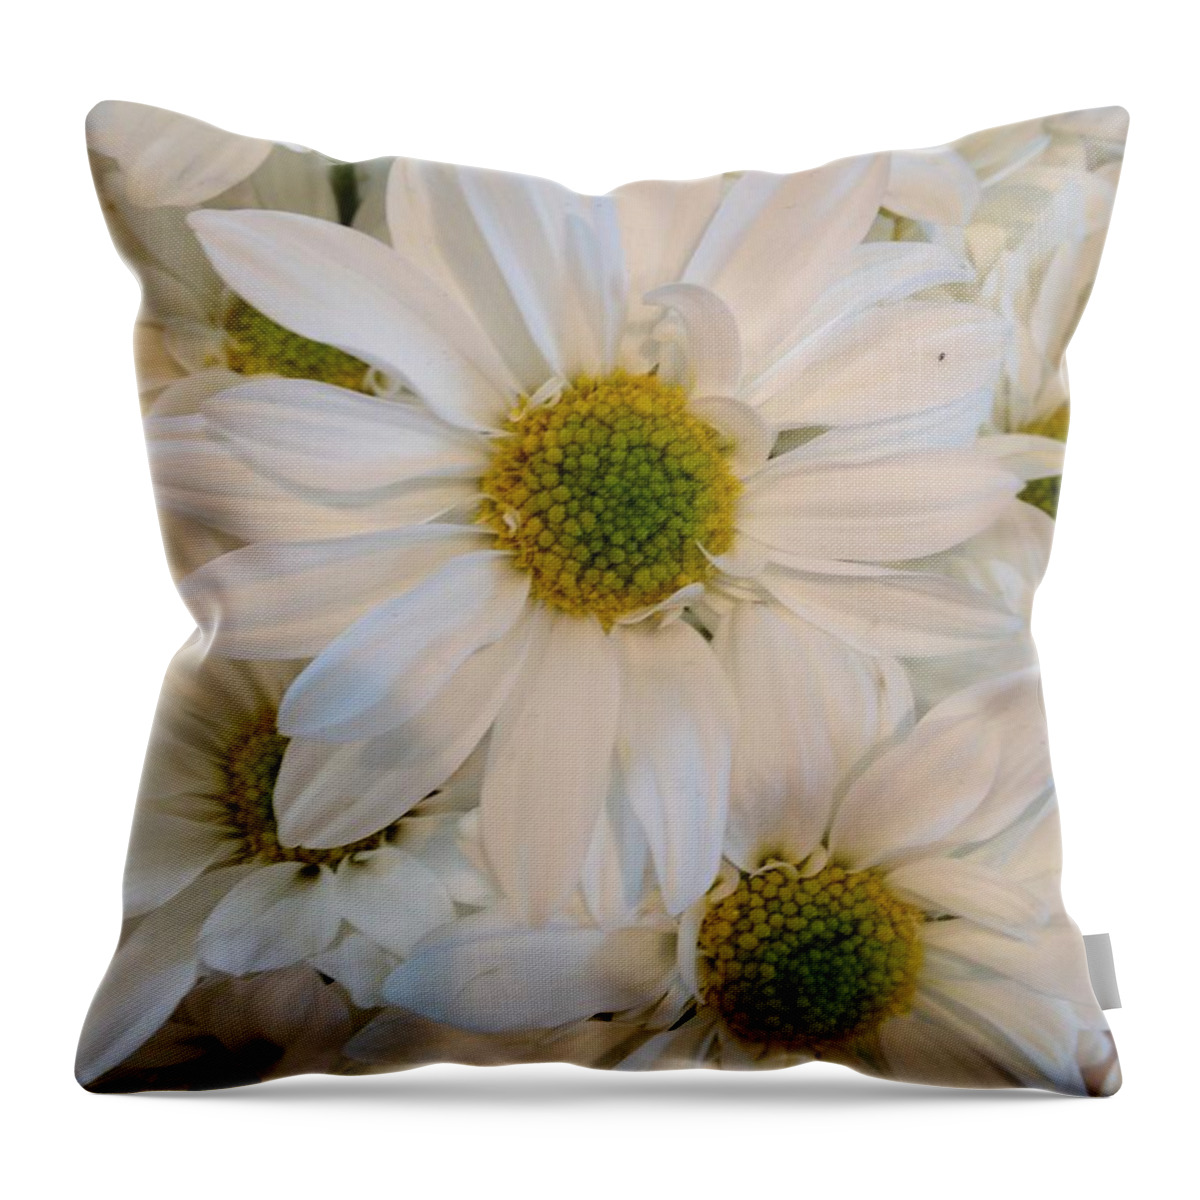 Daisy Throw Pillow featuring the photograph White Daisies by Marian Lonzetta